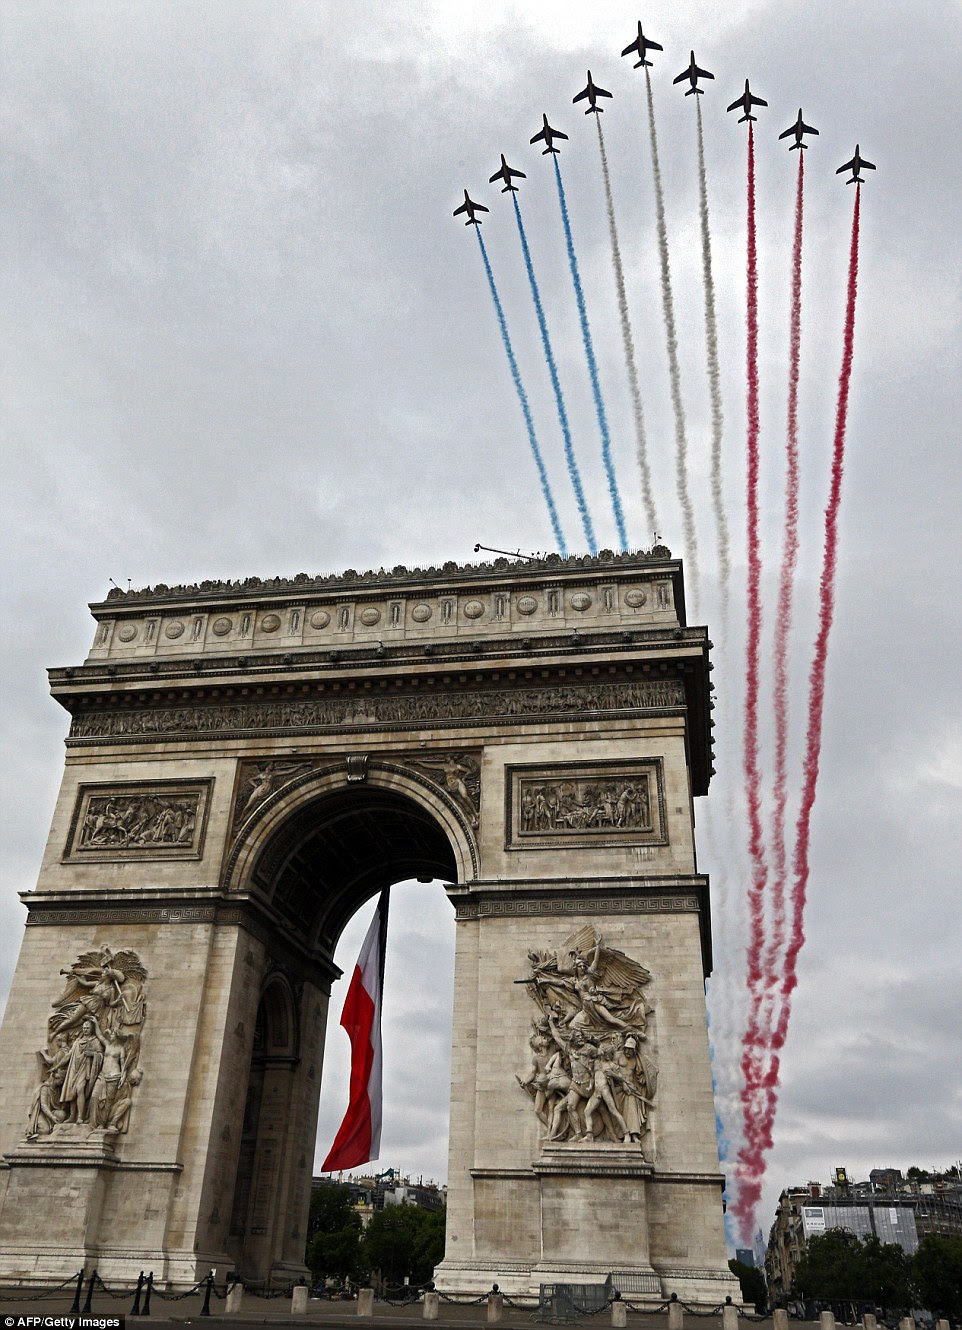 The Alpha jets of the French Air Force wow the crowds as they maintain a tight formation above the Arc de Triomphe